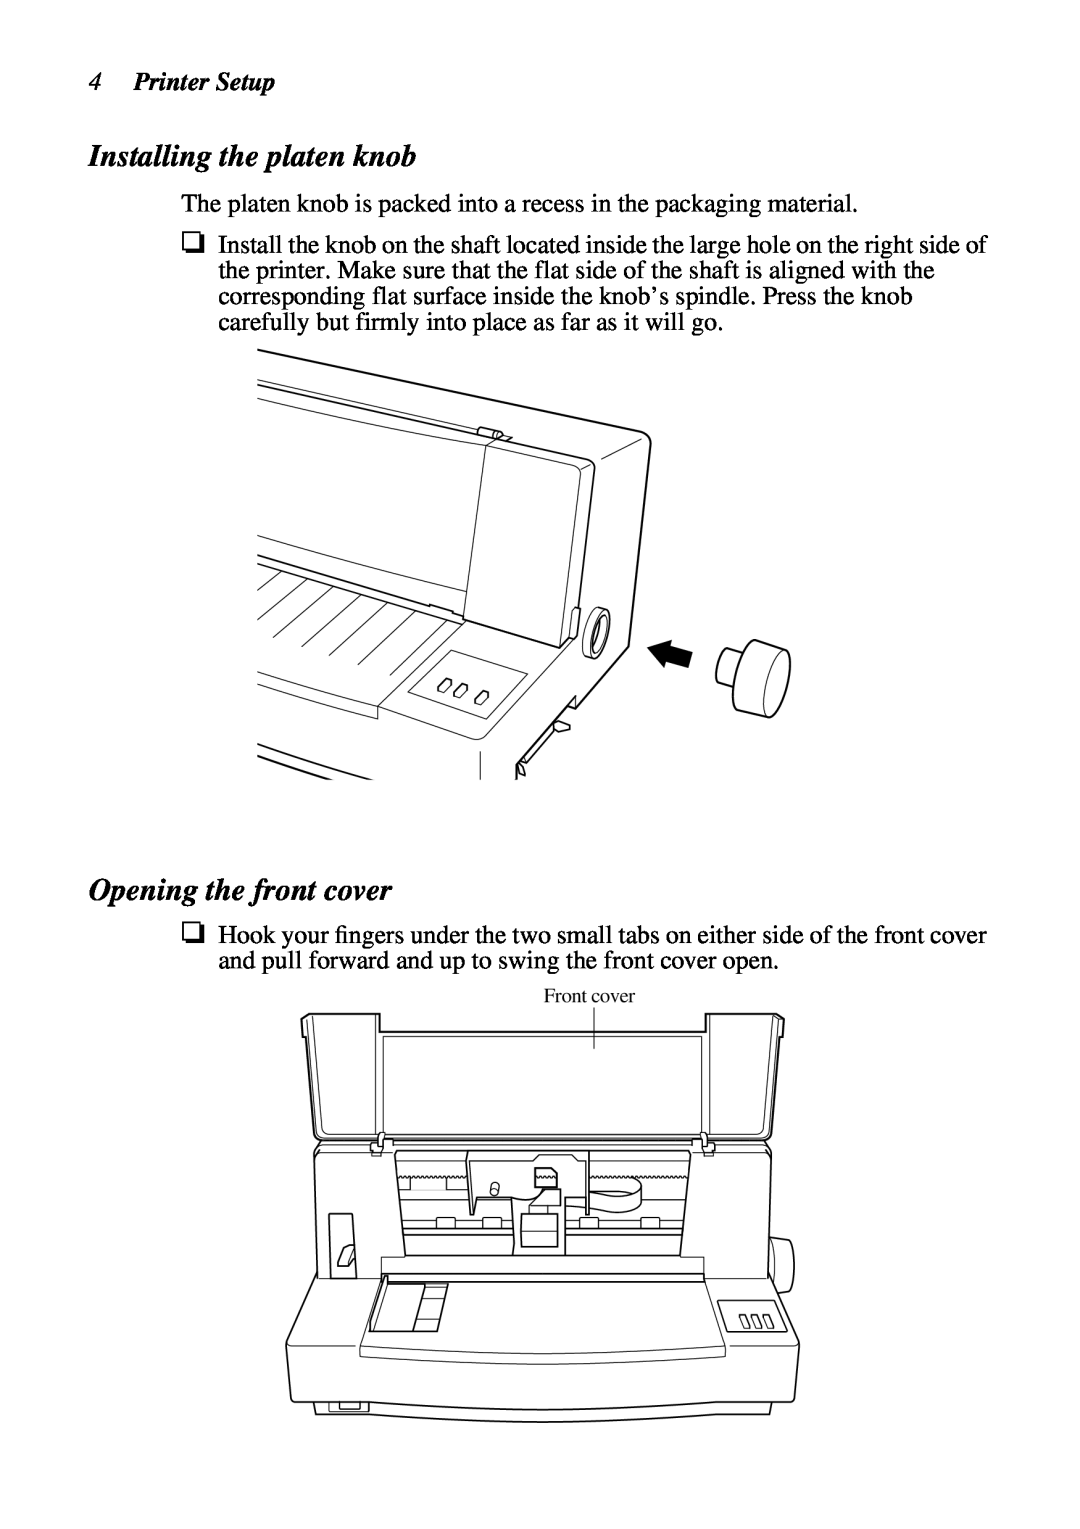 Star Micronics LC-6211 user manual Installing the platen knob, Opening the front cover, Printer Setup 